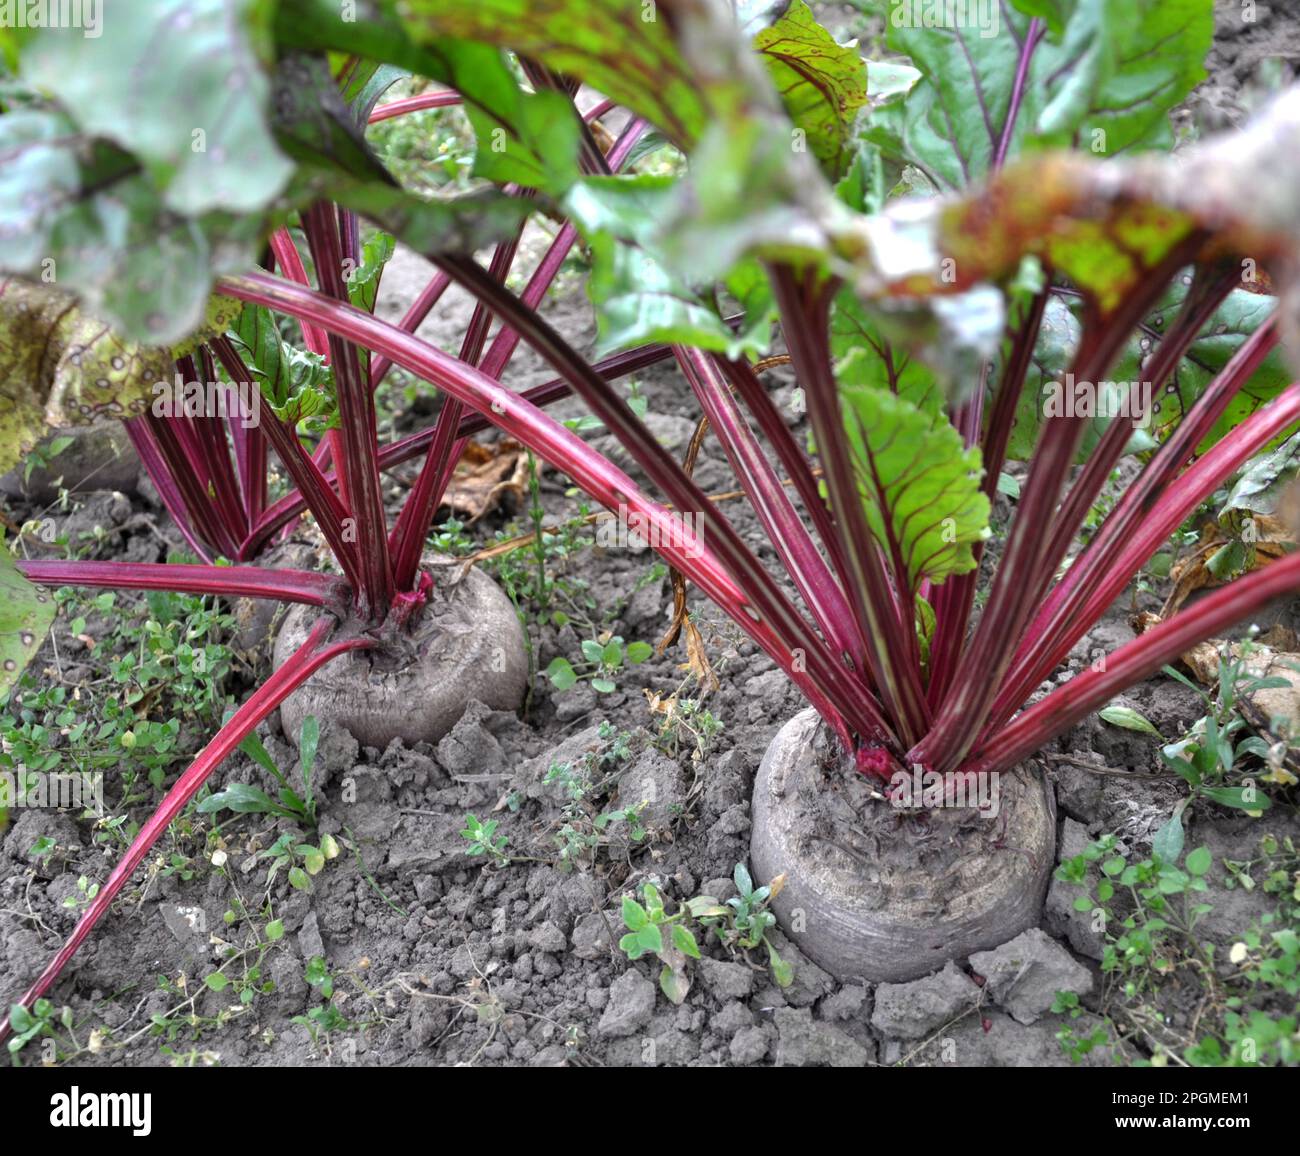 The red beet grows in open organic soil Stock Photo